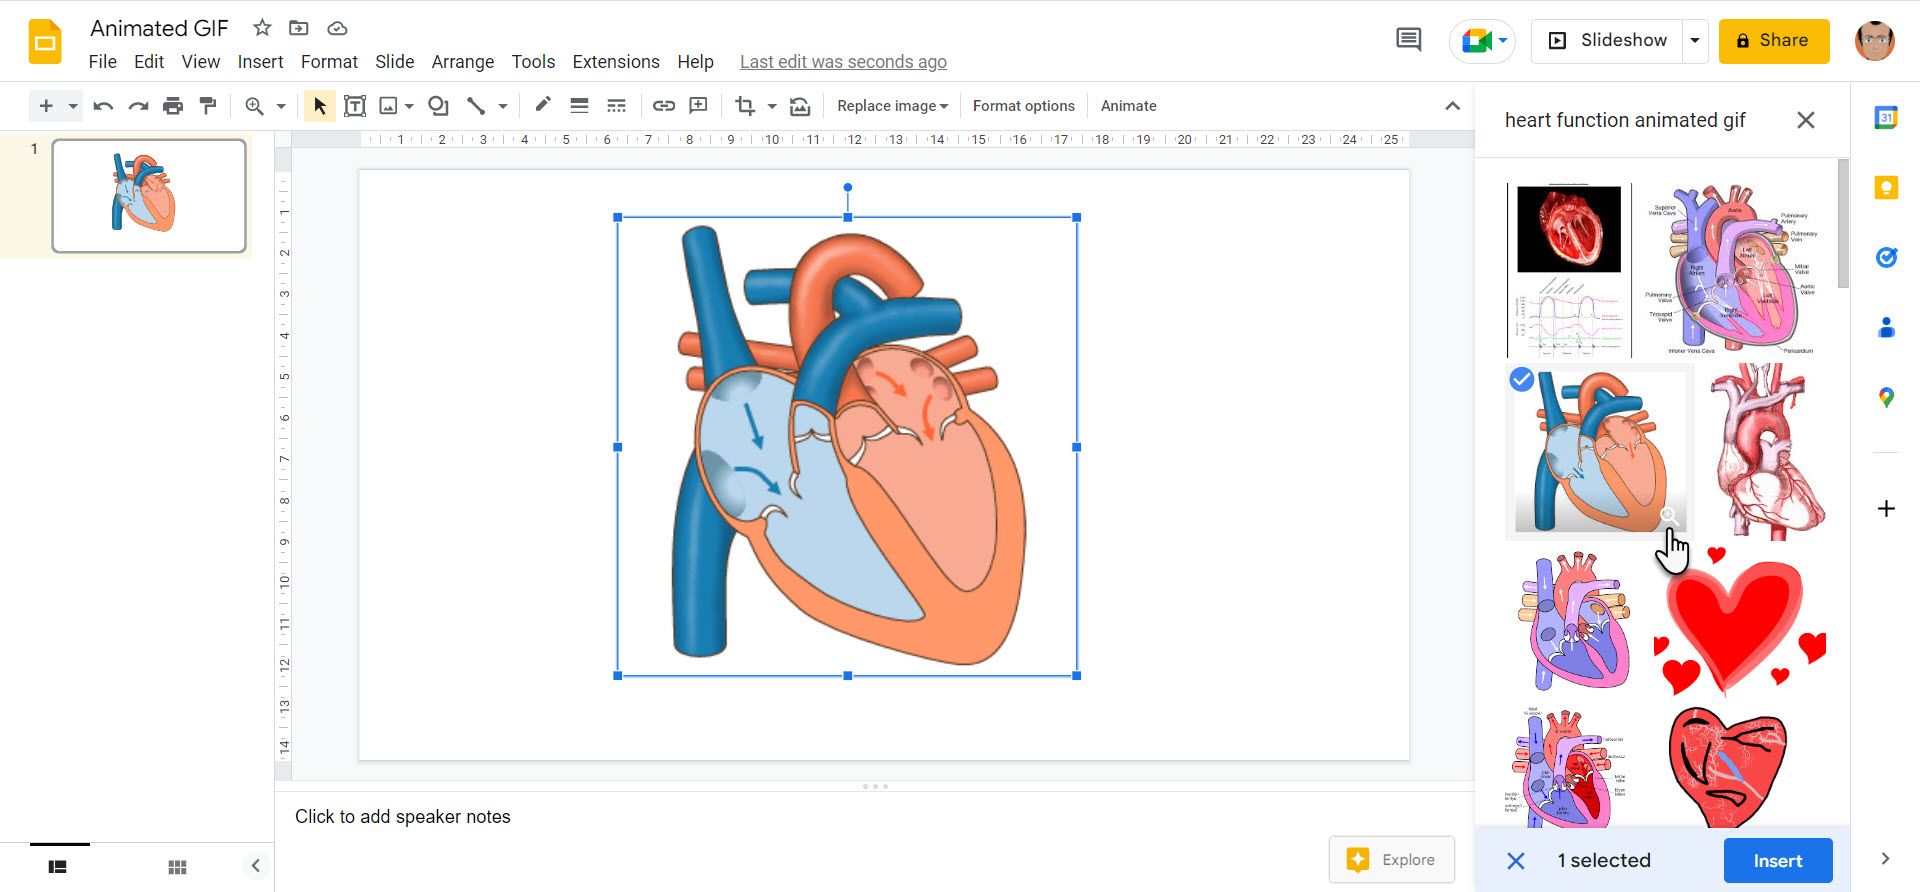 Use Google Search in Google Slides to Insert Animated GIF